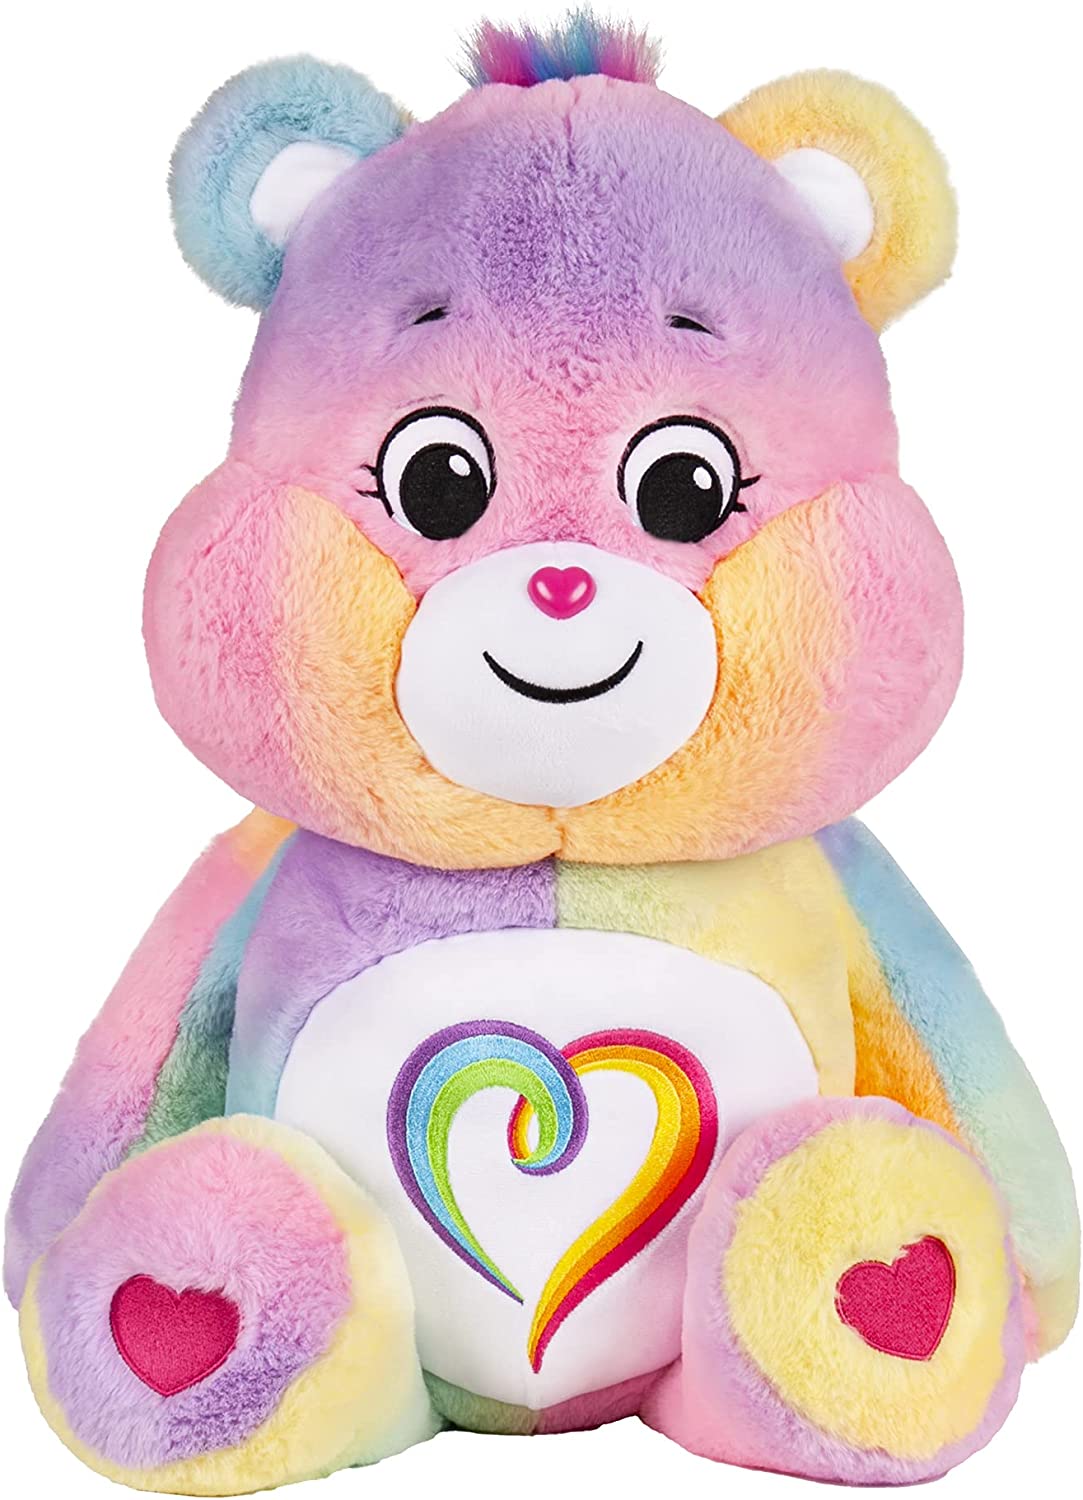 24" Care Bears Jumbo Plush Togetherness Bear $18.29 + Free Shipping w/ Prime or on $25+